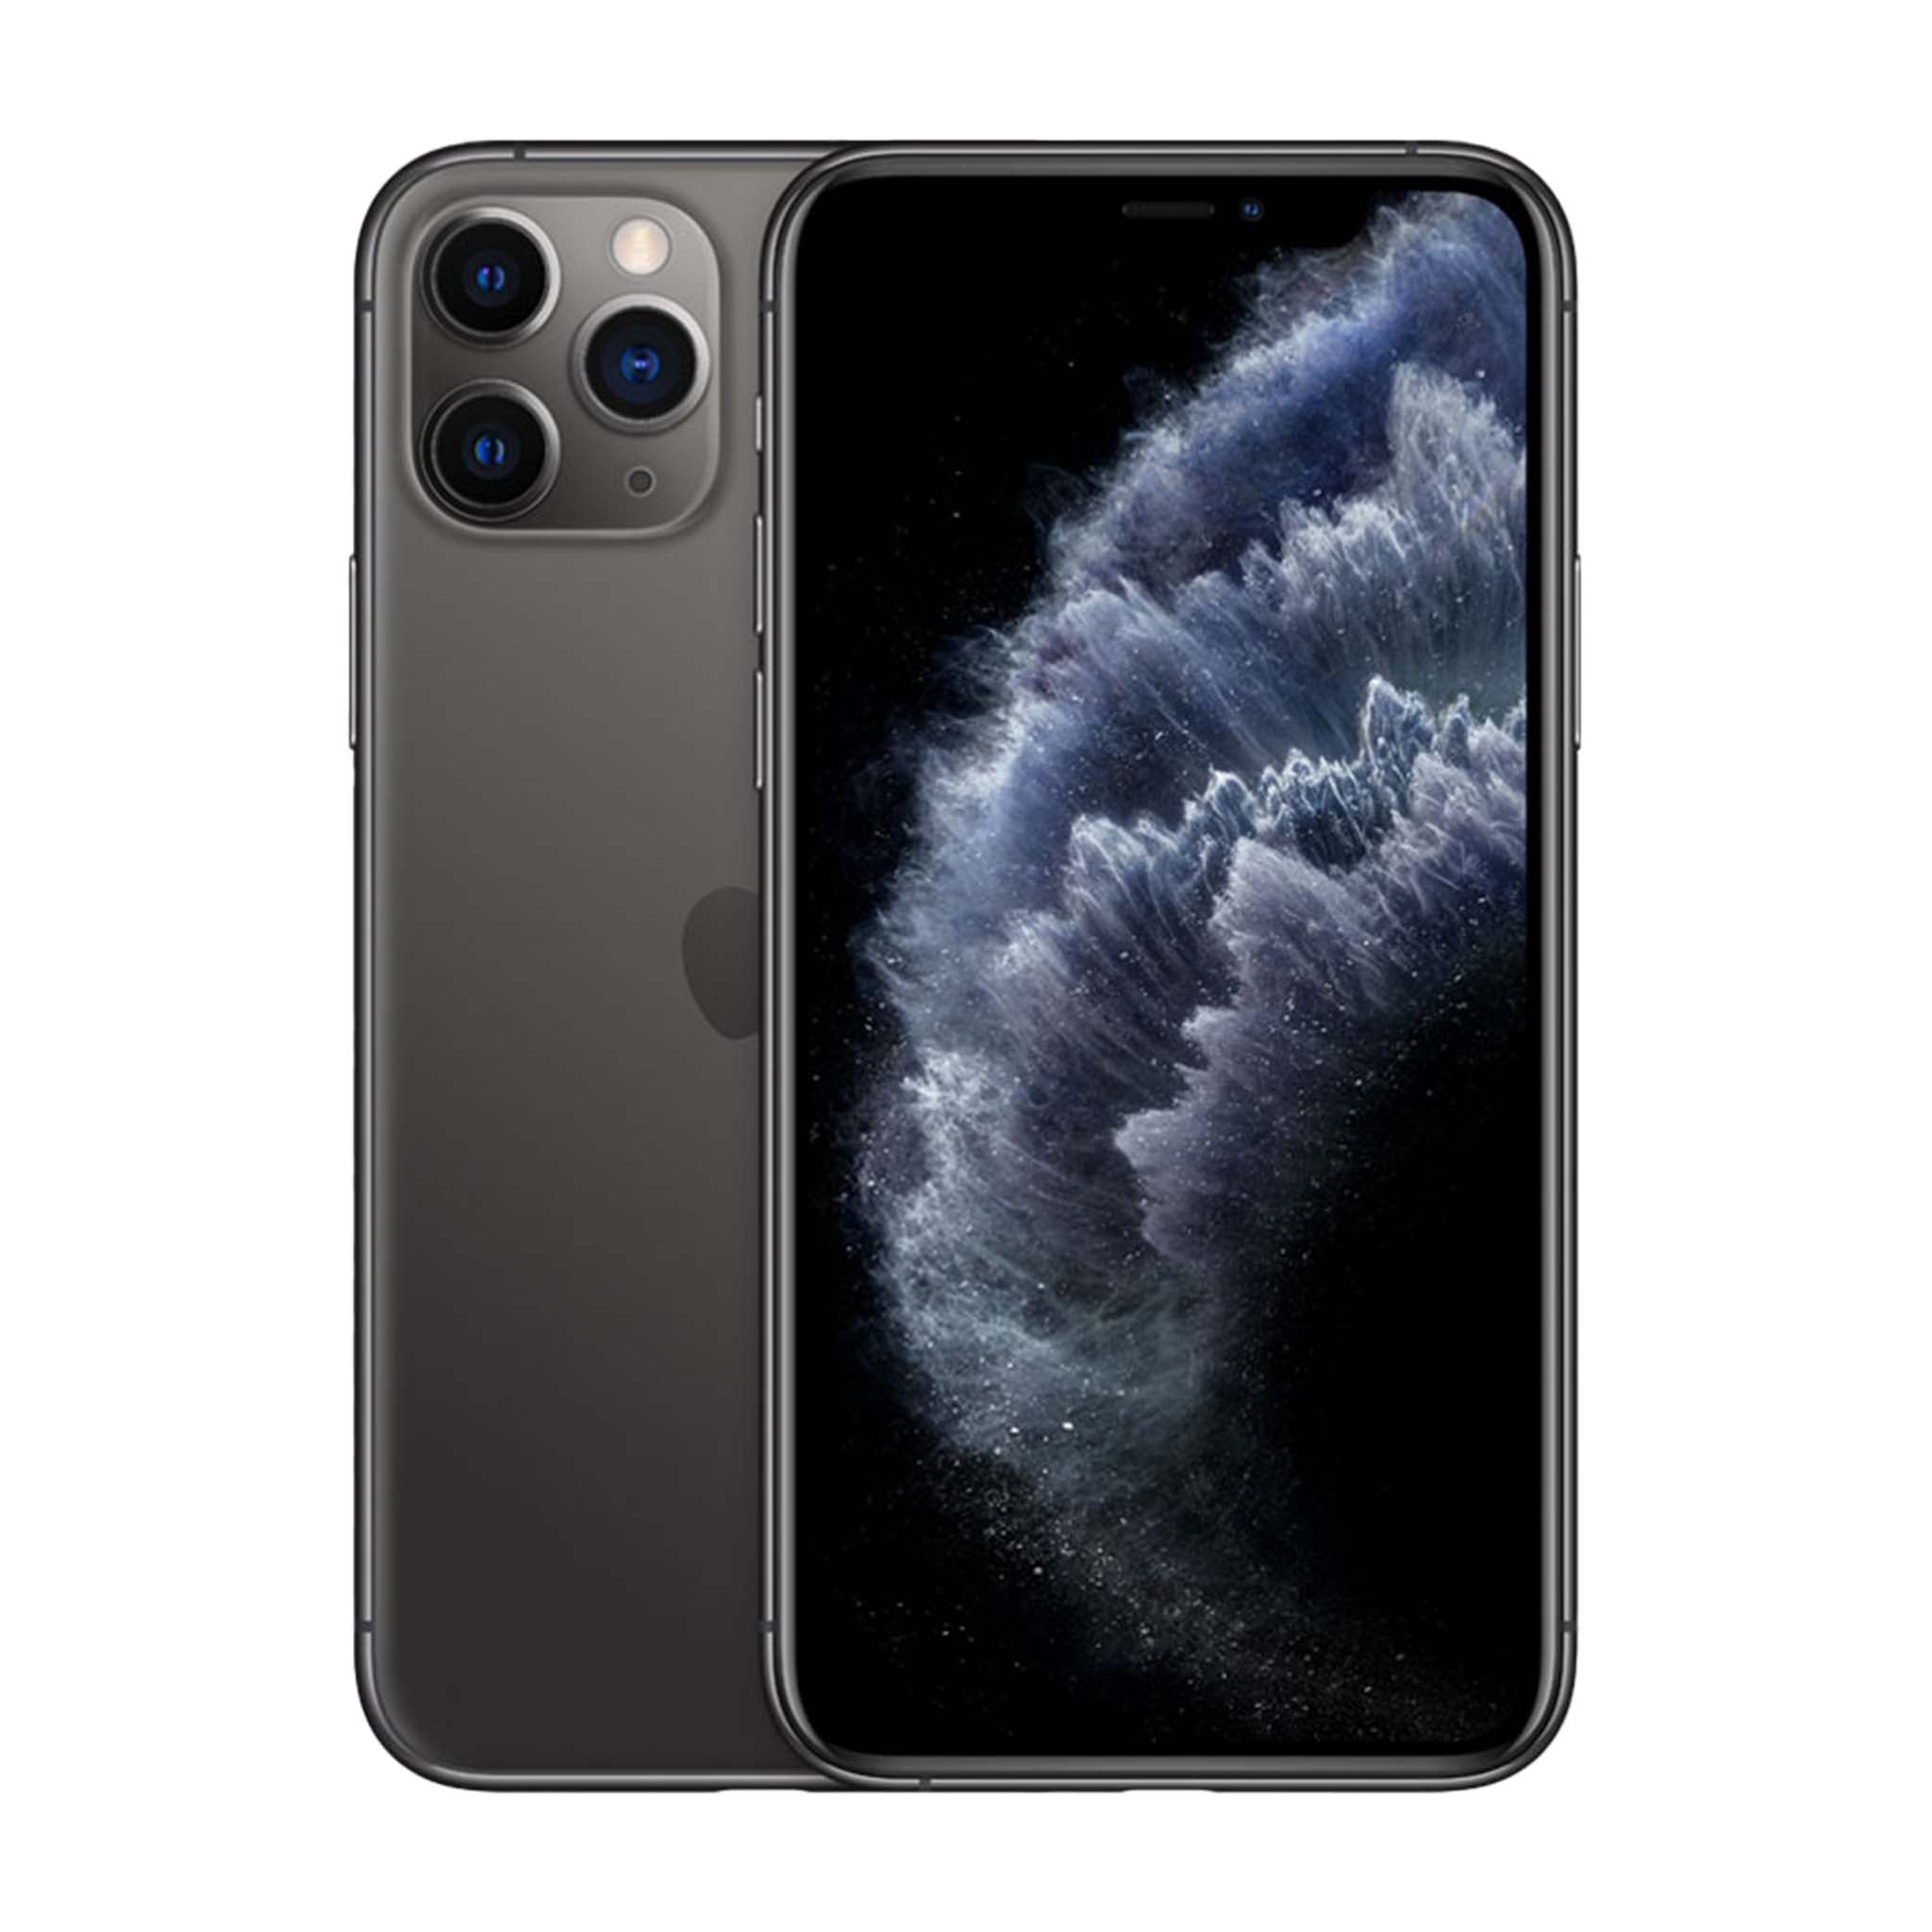 iPhone 11 Pro Space Gray 64GB